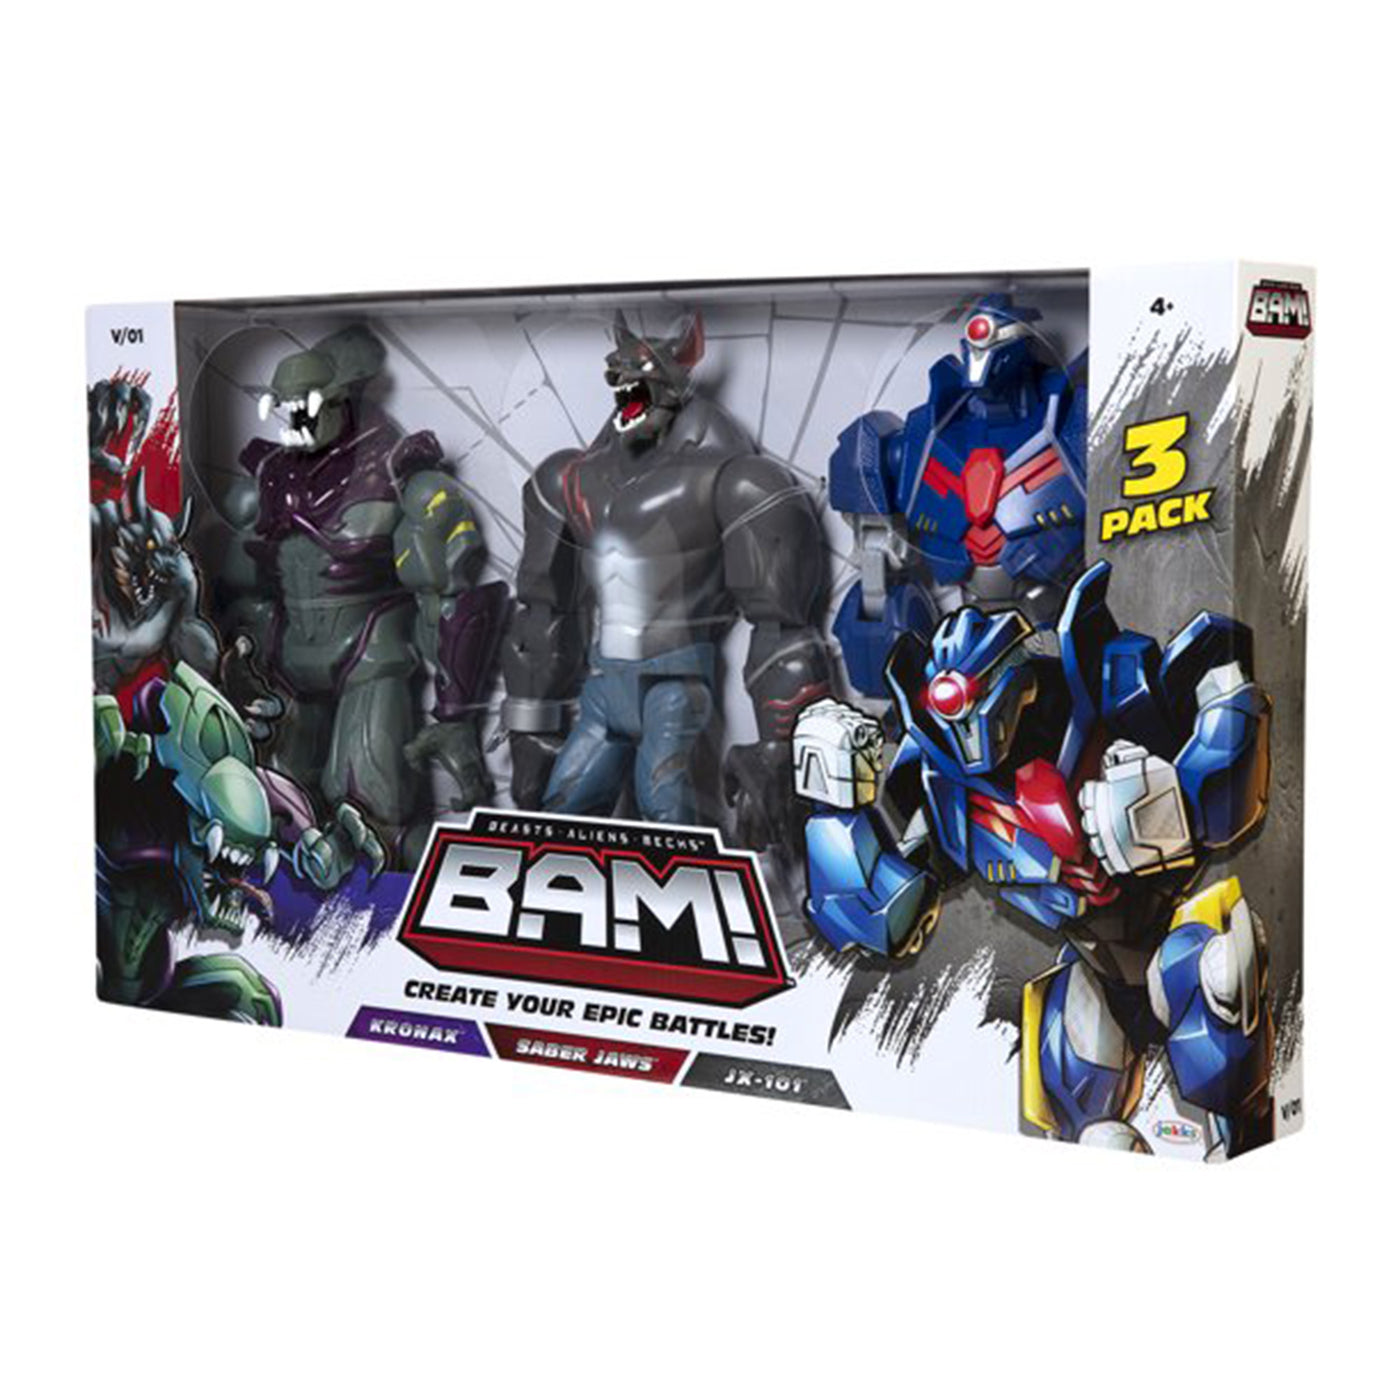 B.A.M. Beast Aliens Mech® 11" Action Figure 3 Pack includes Saber Jaws,Kronax, and JX-101